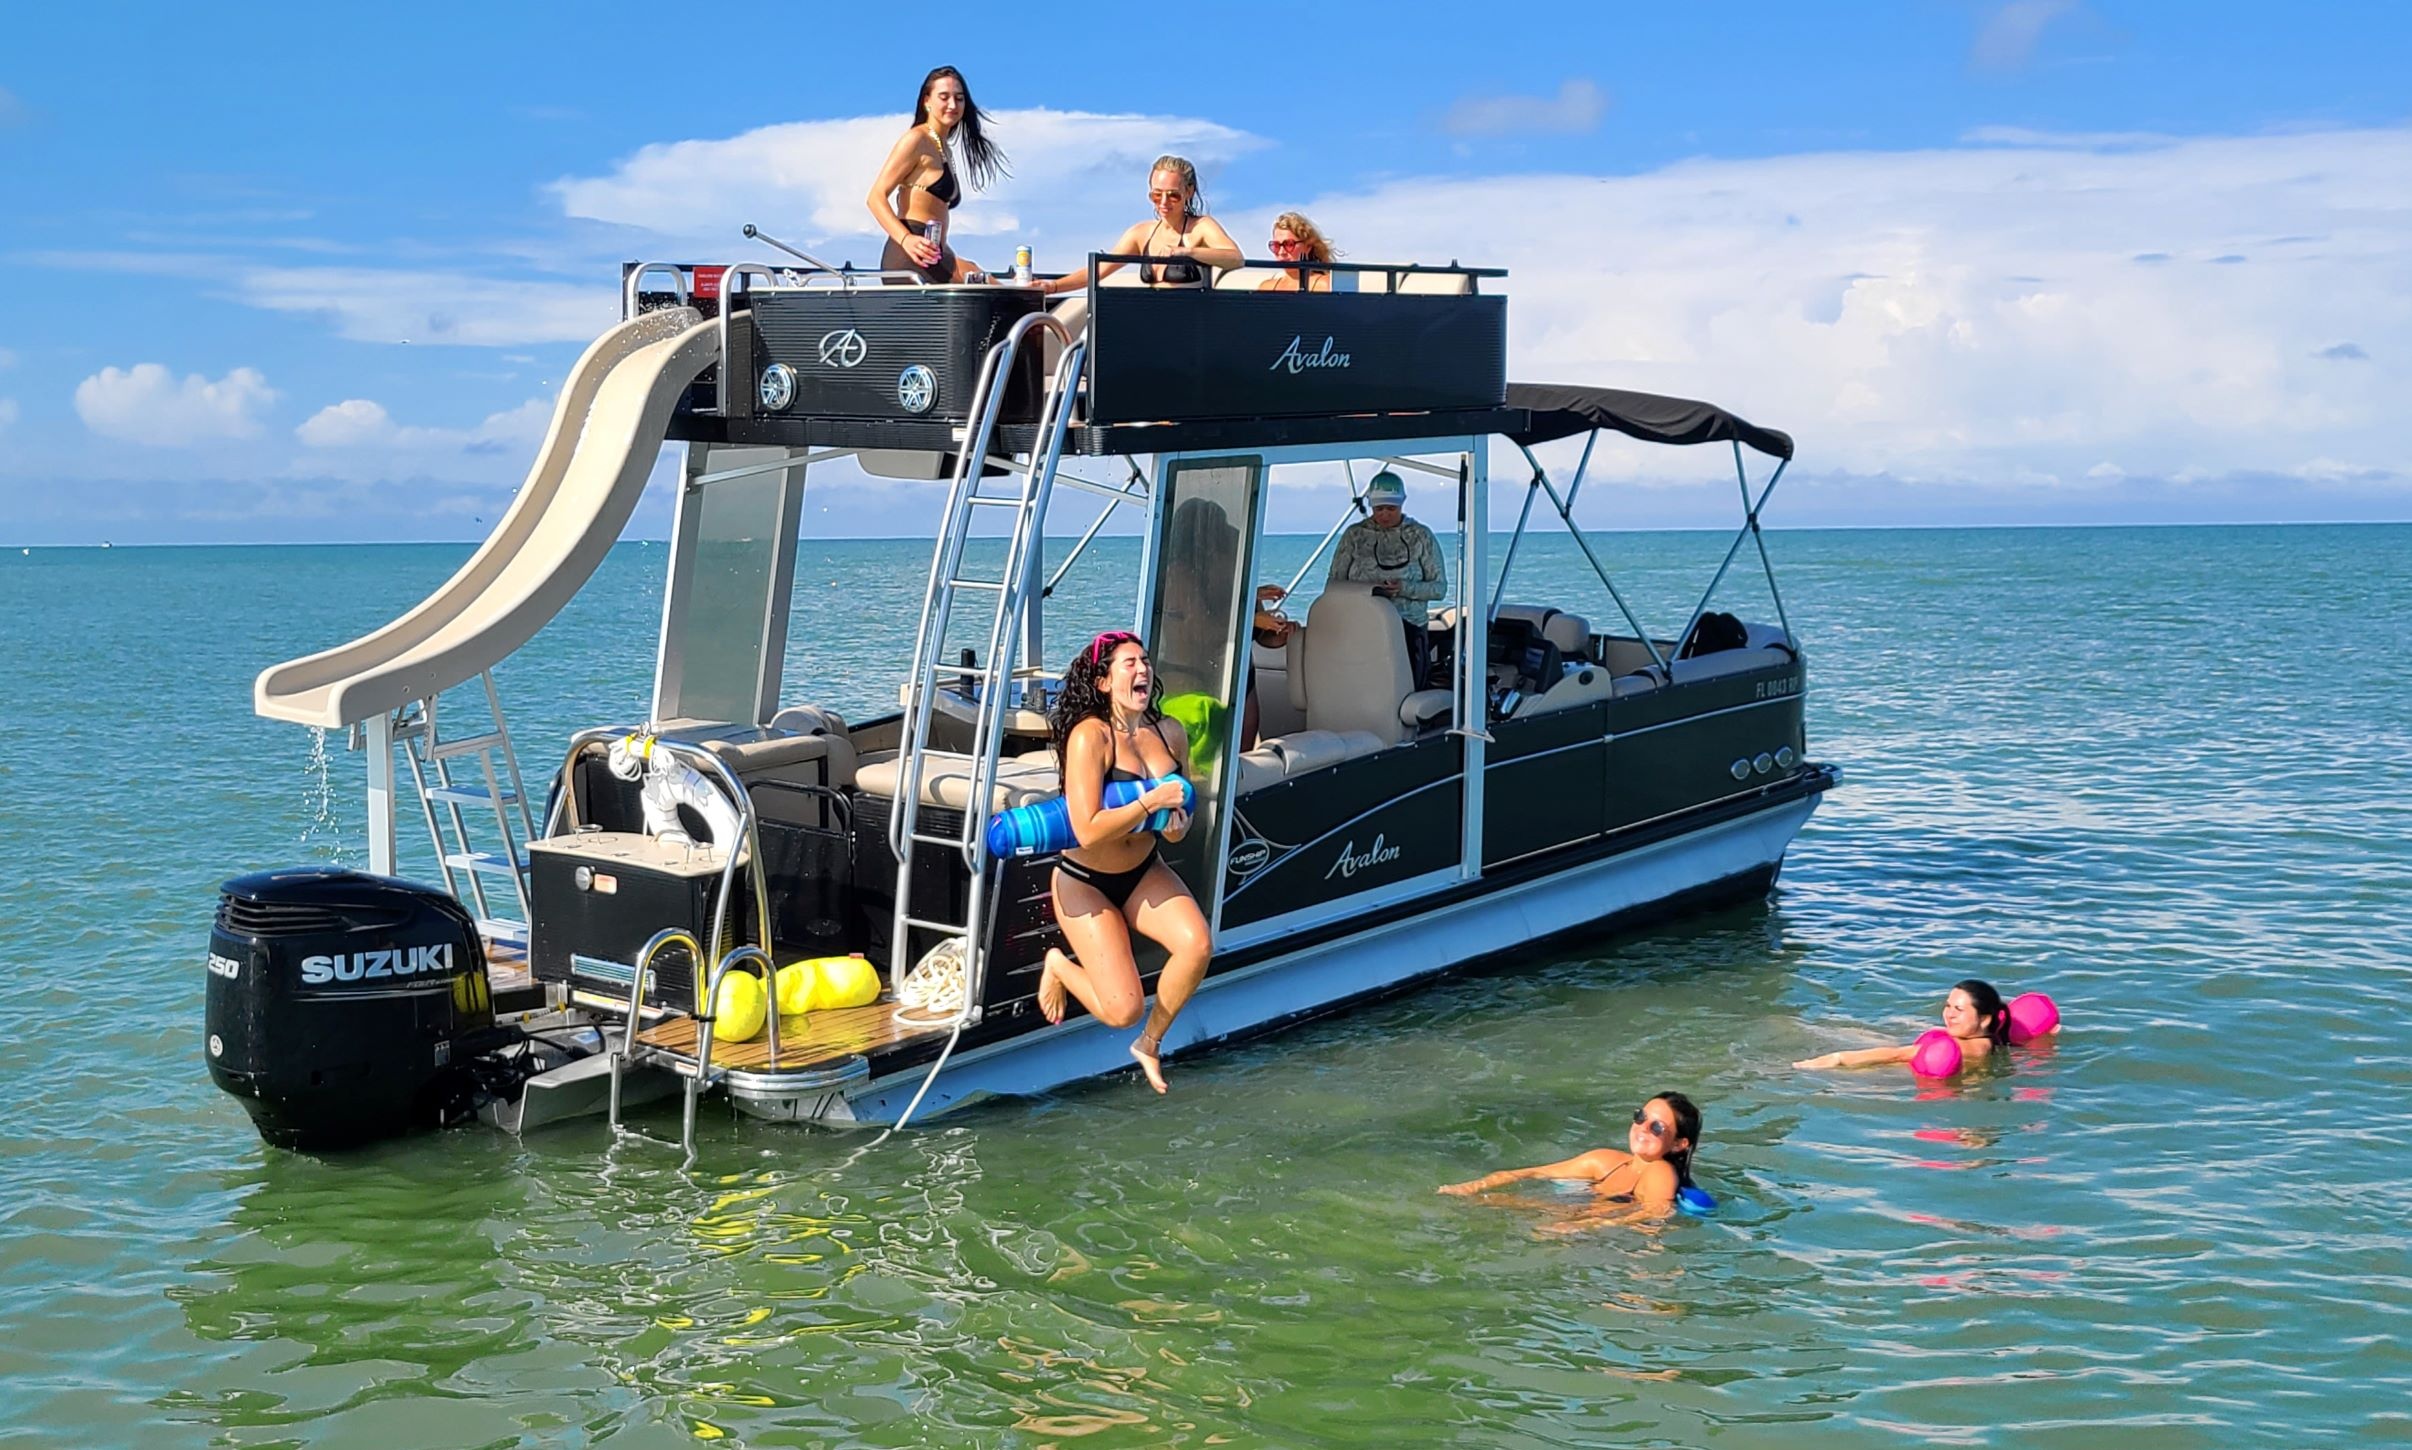 ⚓Plan for a Great Day on the Avalon Funship Pontoon boat with a